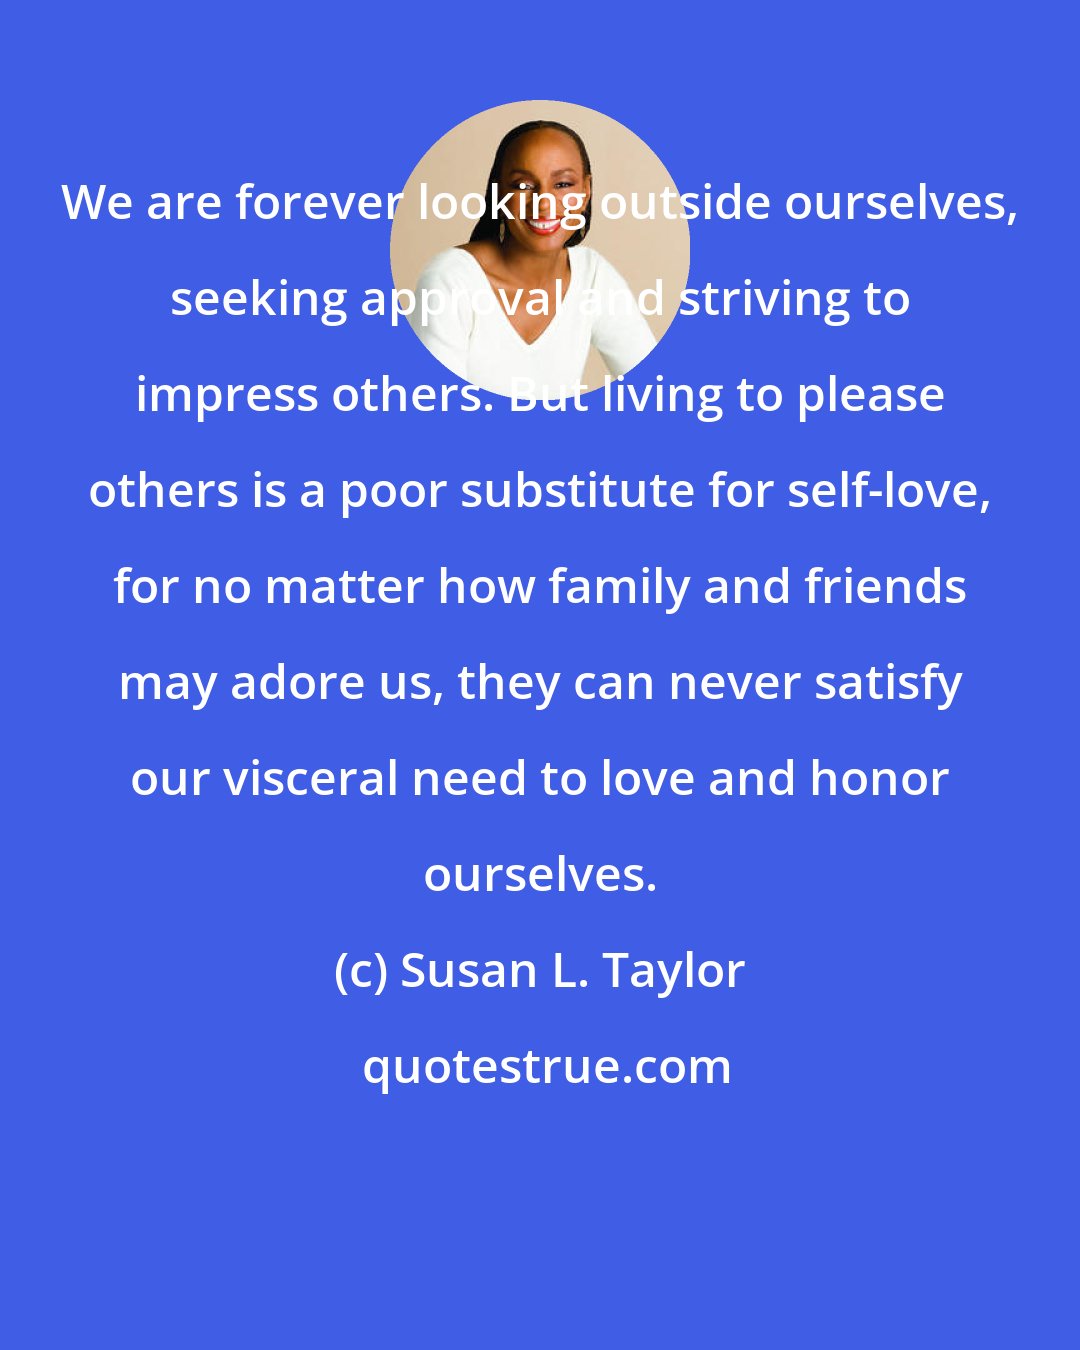 Susan L. Taylor: We are forever looking outside ourselves, seeking approval and striving to impress others. But living to please others is a poor substitute for self-love, for no matter how family and friends may adore us, they can never satisfy our visceral need to love and honor ourselves.